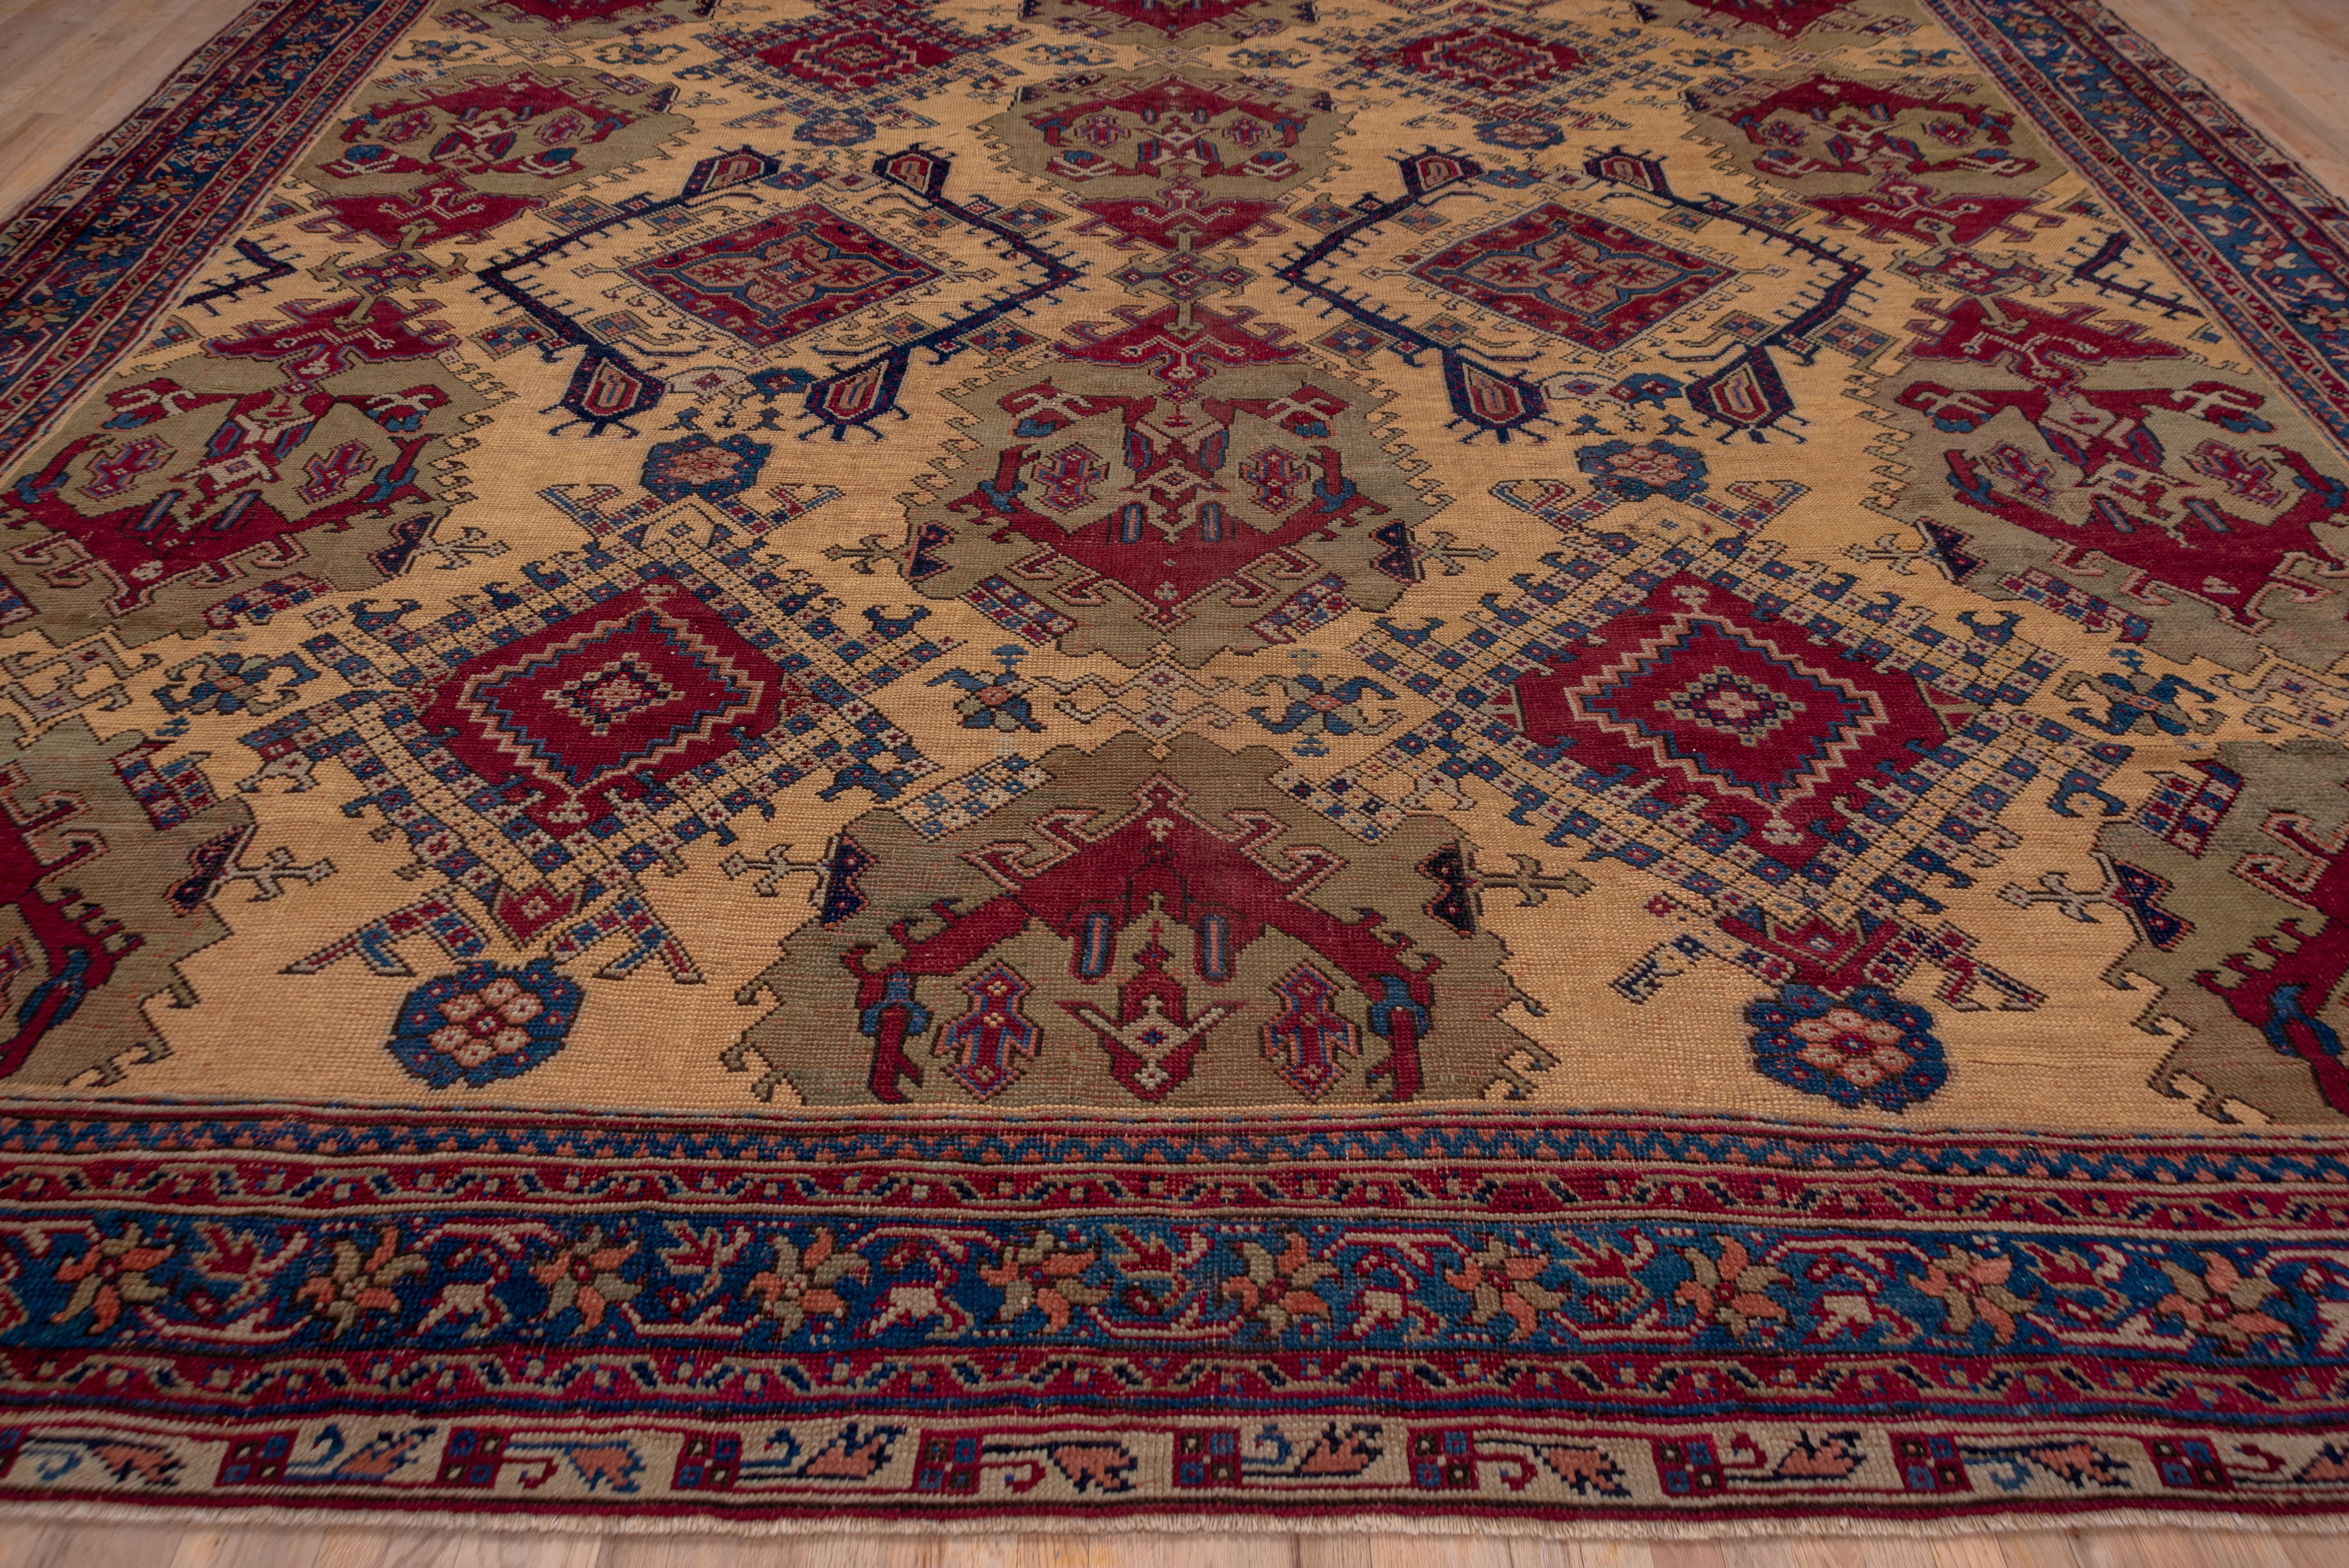 This unusual western Turkish workshop carpet displays five columns of giant hooked palmettes, and Yaprak and color sampler diamonds on an old ivory field with jade green and Turkey red accents. The forest green border presents a vine and tilted